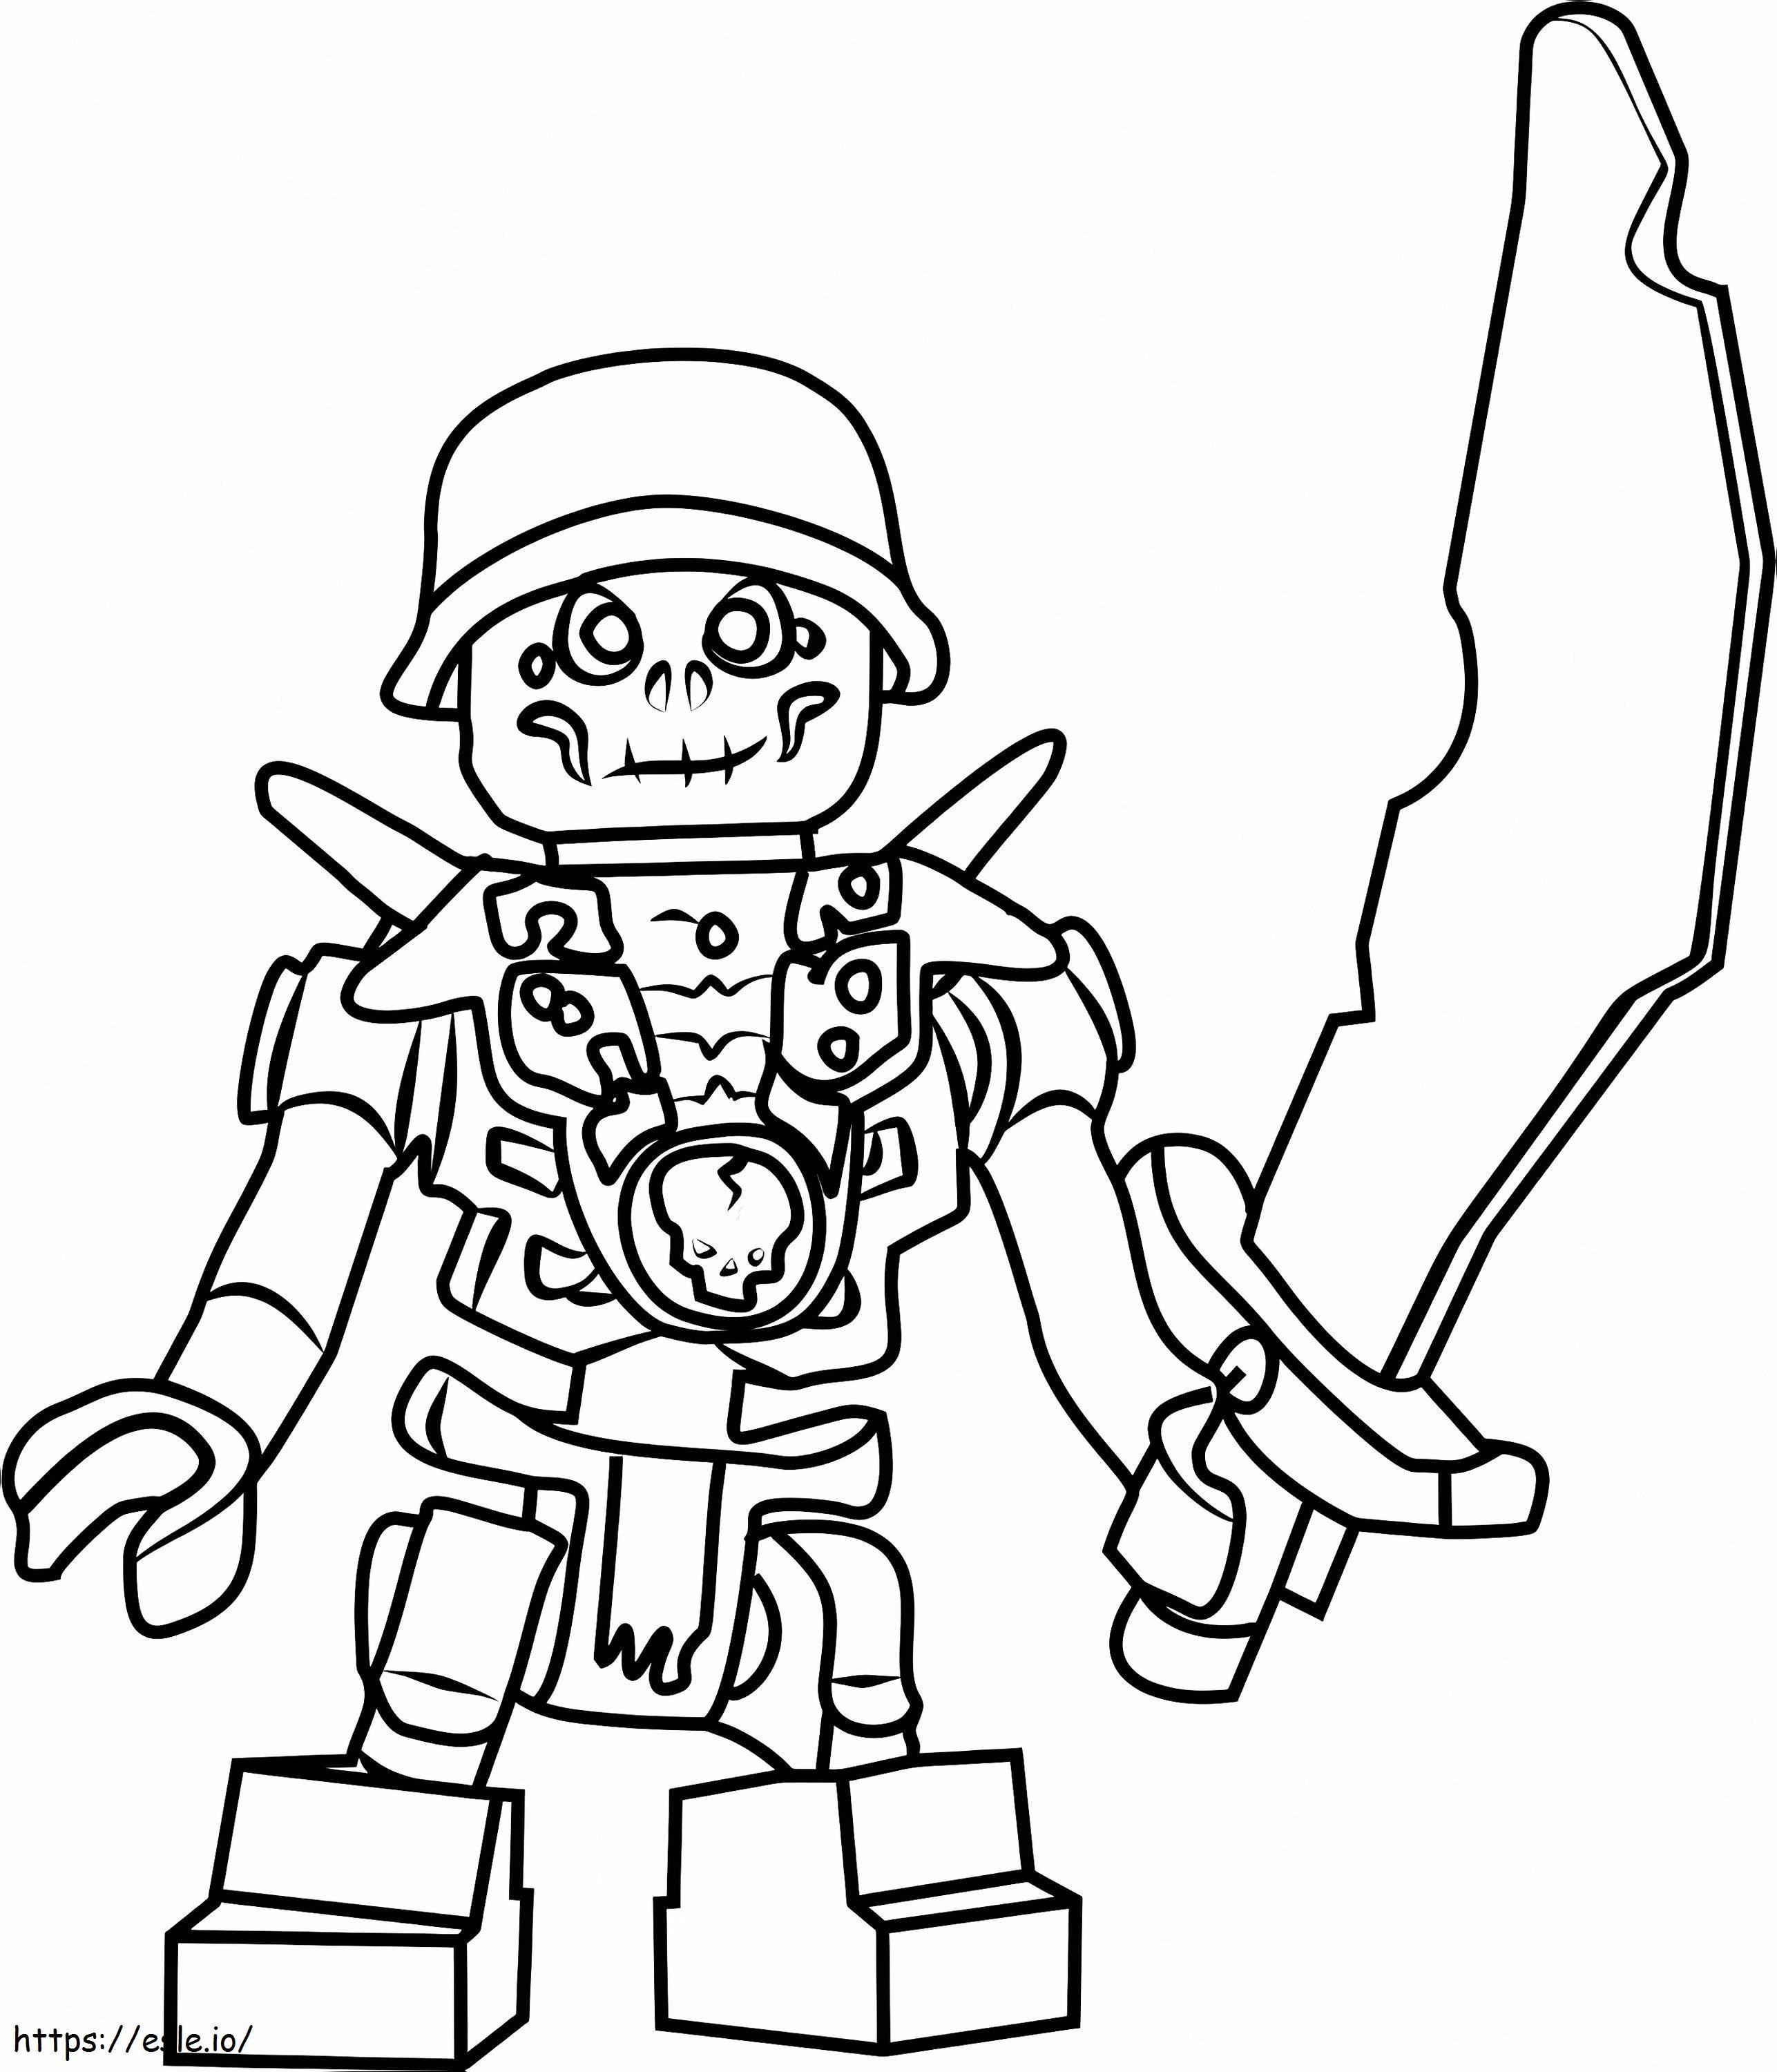 1529721612 22 coloring page